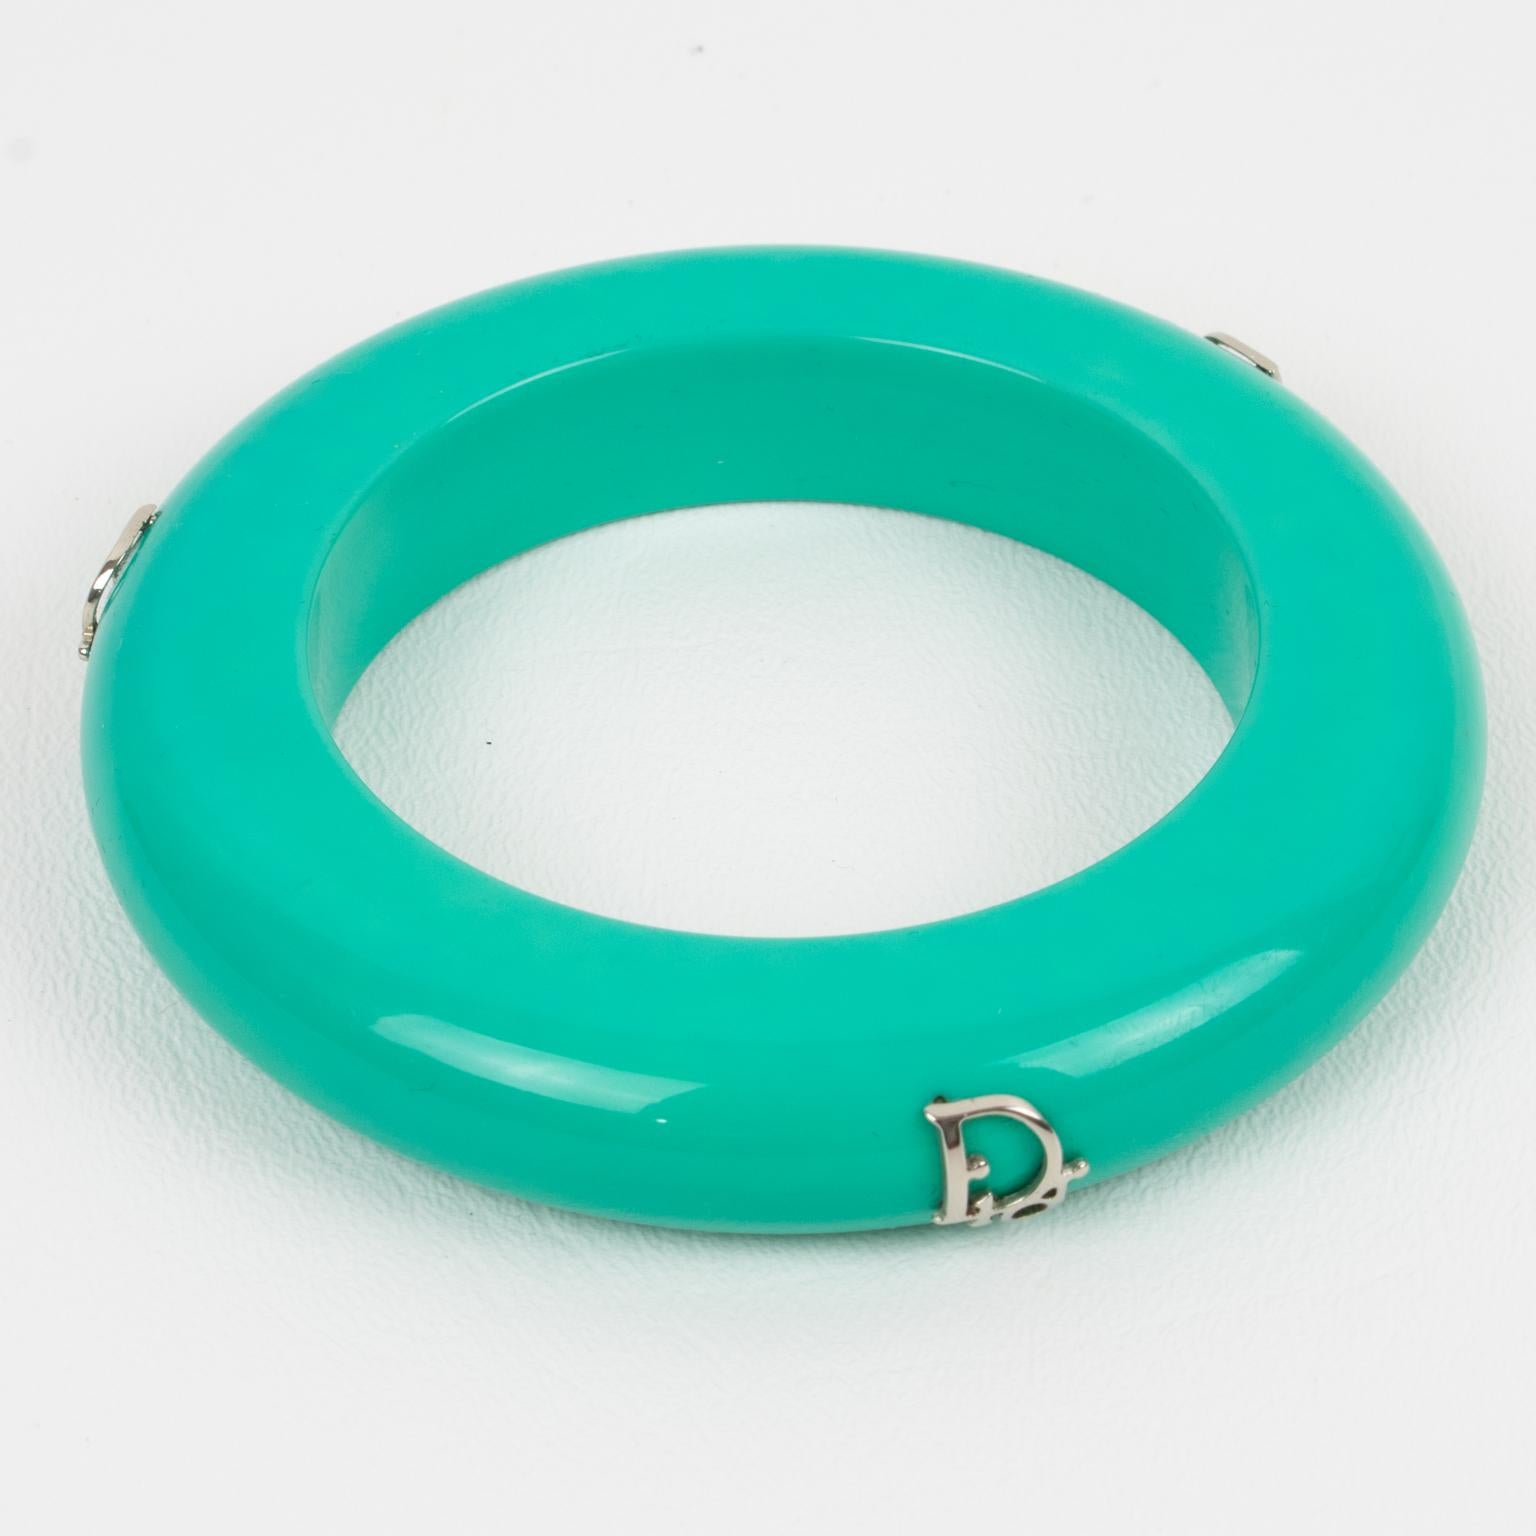 This exquisite bangle bracelet by Christian Dior features a stunning turquoise hue and is embellished with three striking silver 